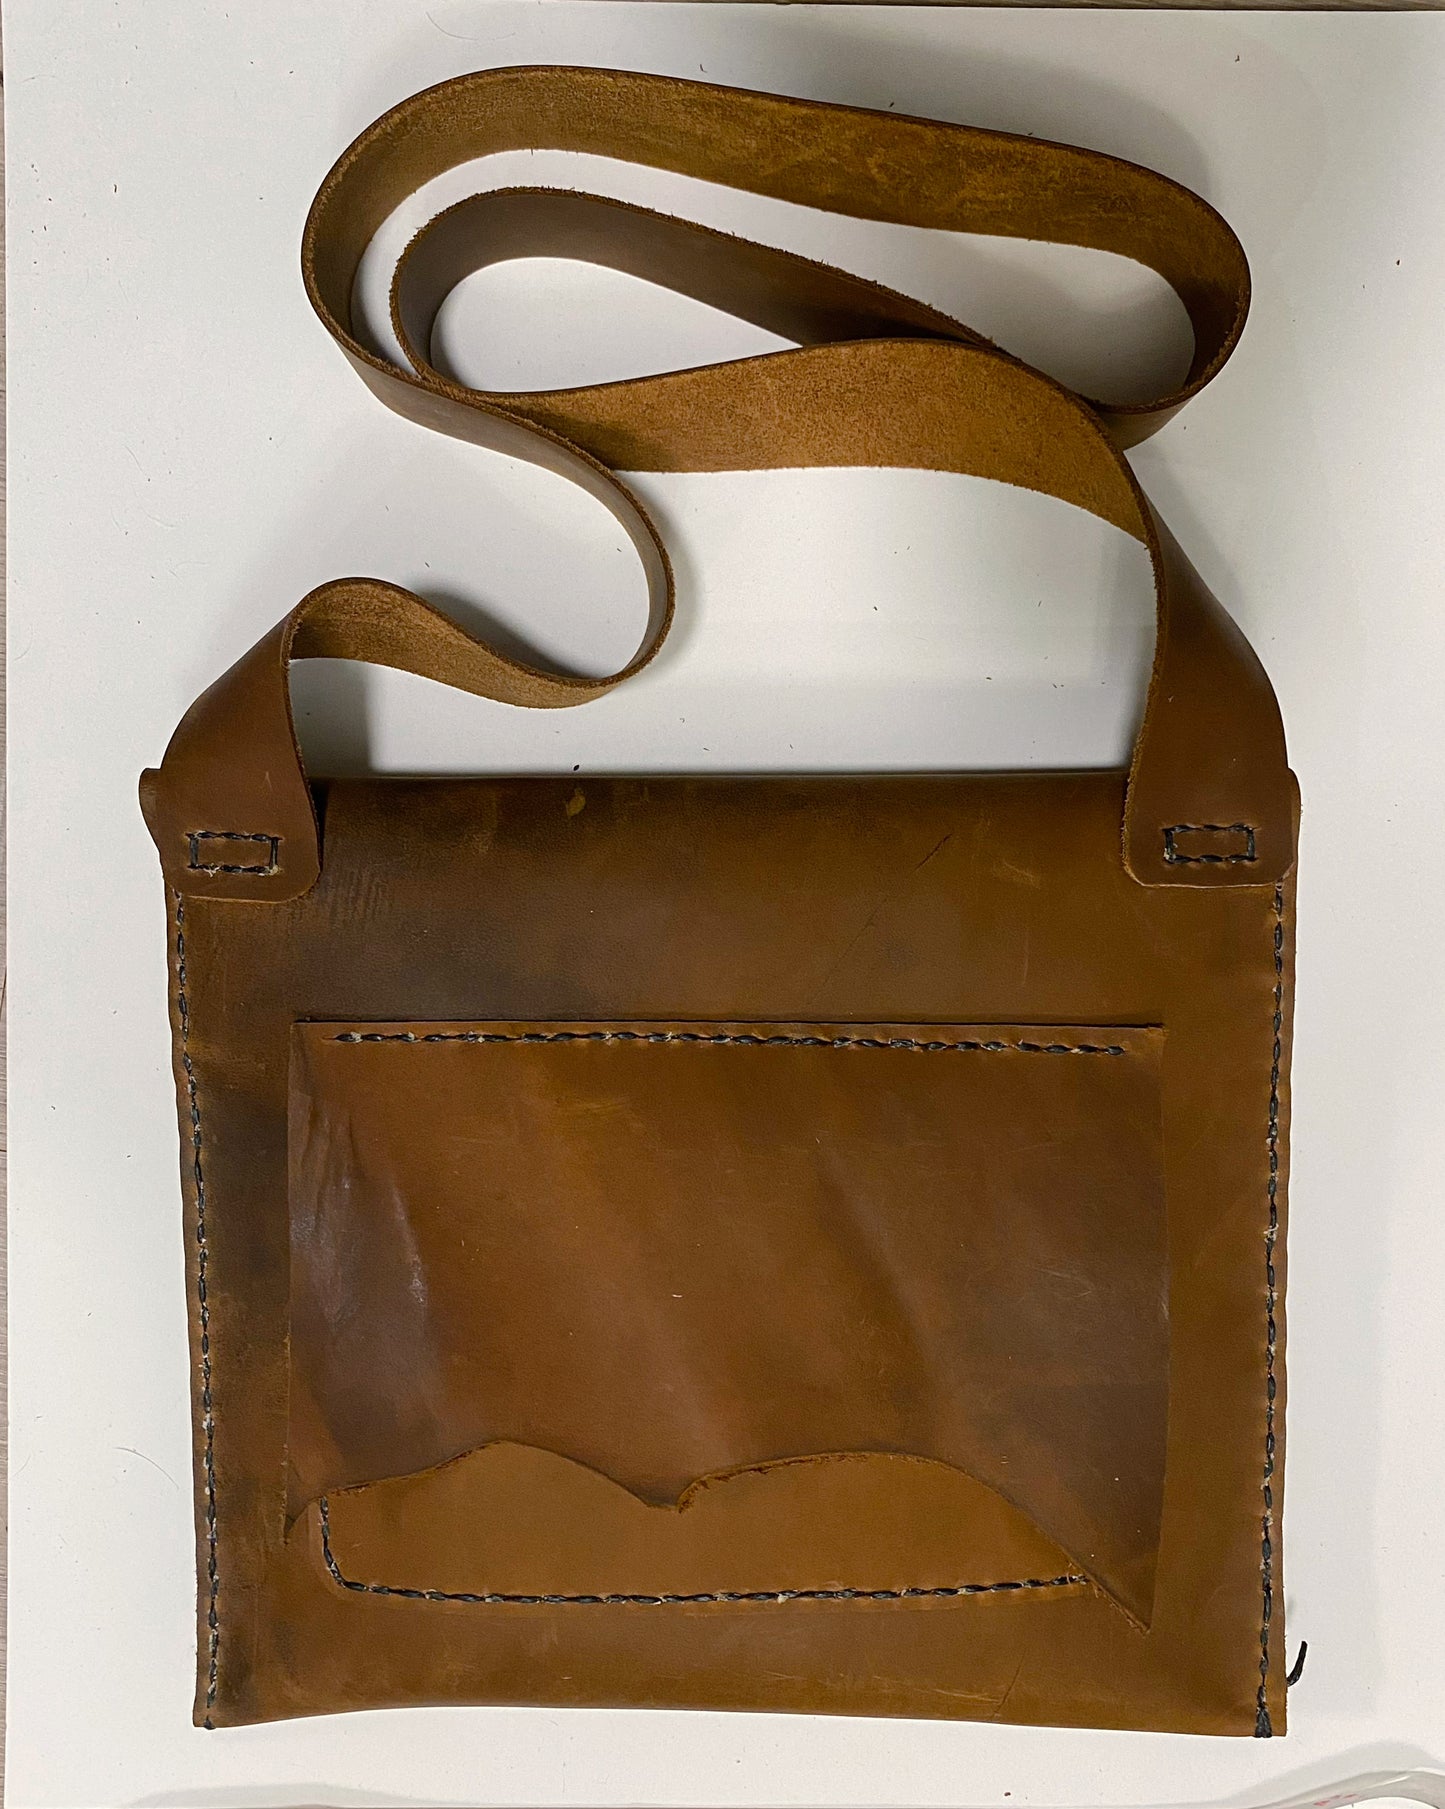 Hand stitched leather club bag